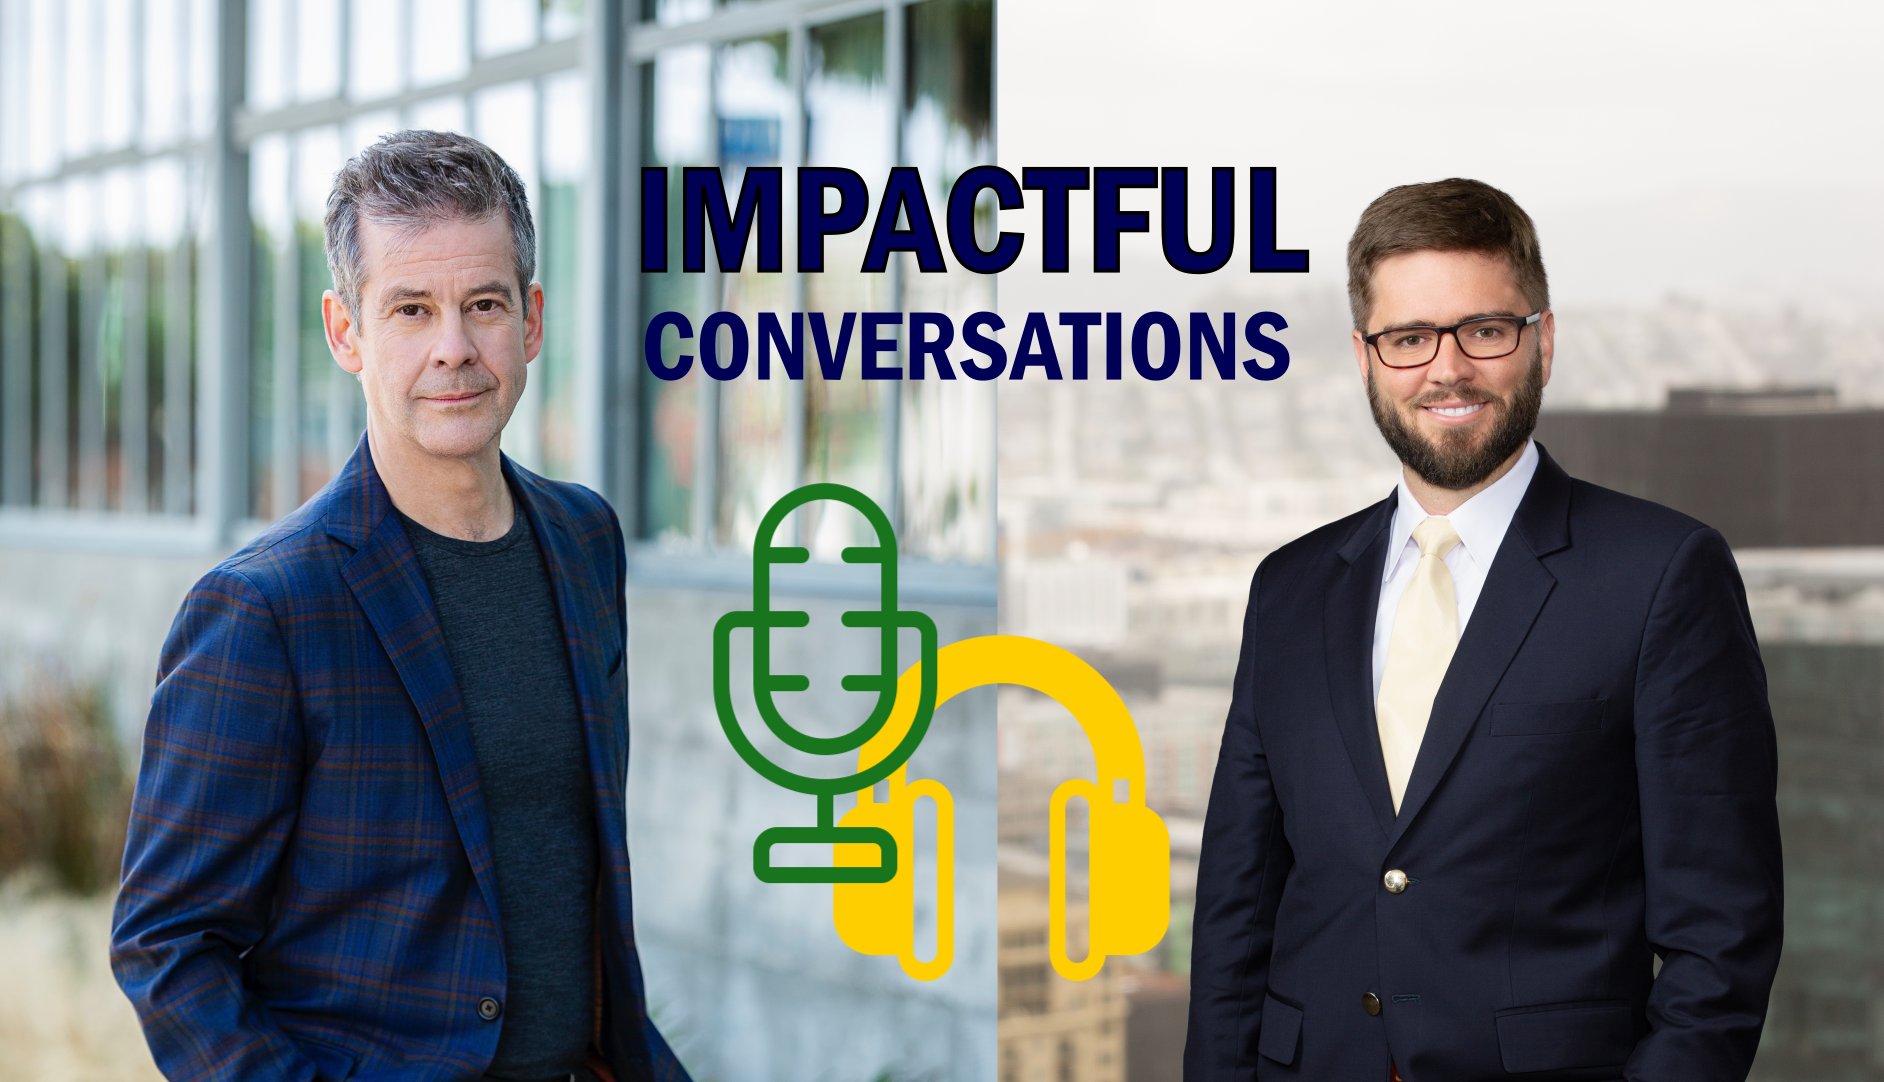 Impactful Conversations - Henrik Jones of Buckhill Capital and Sean Byrne of Morrison and Foerster